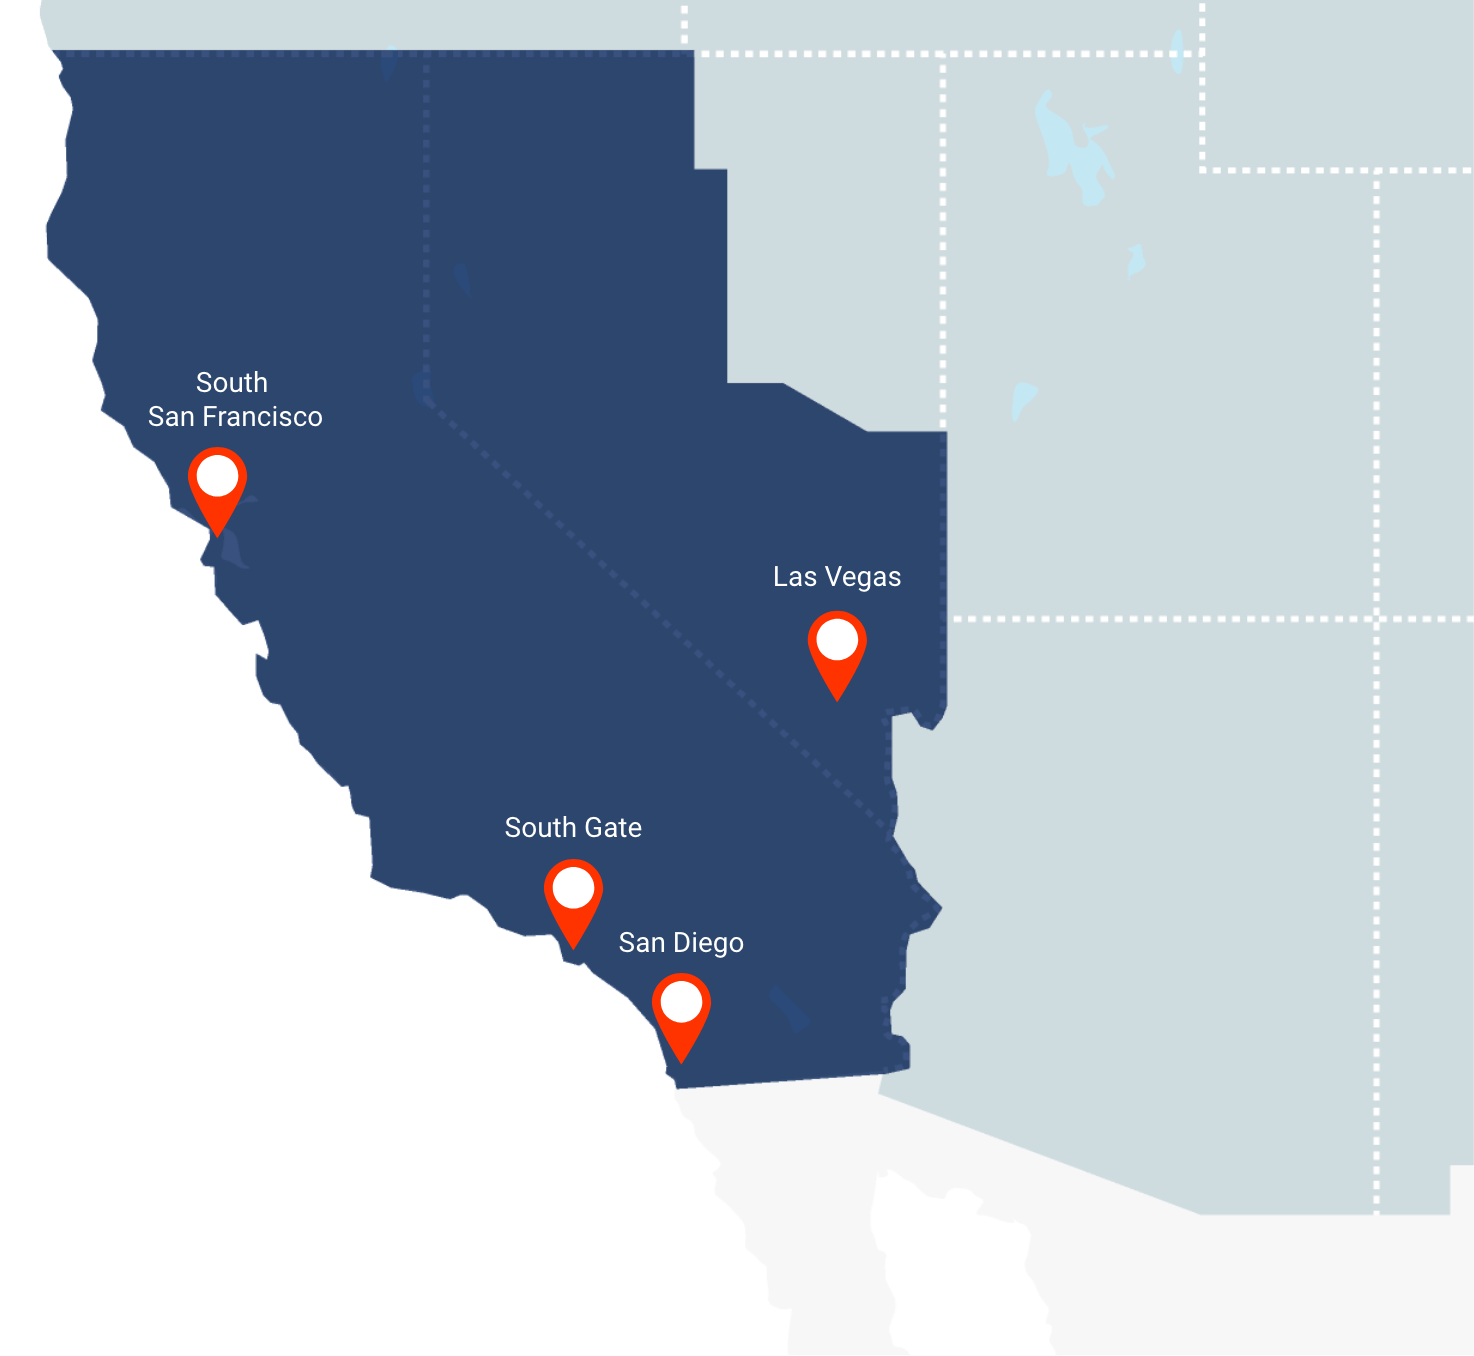 map of California and Nevada with 4 markers